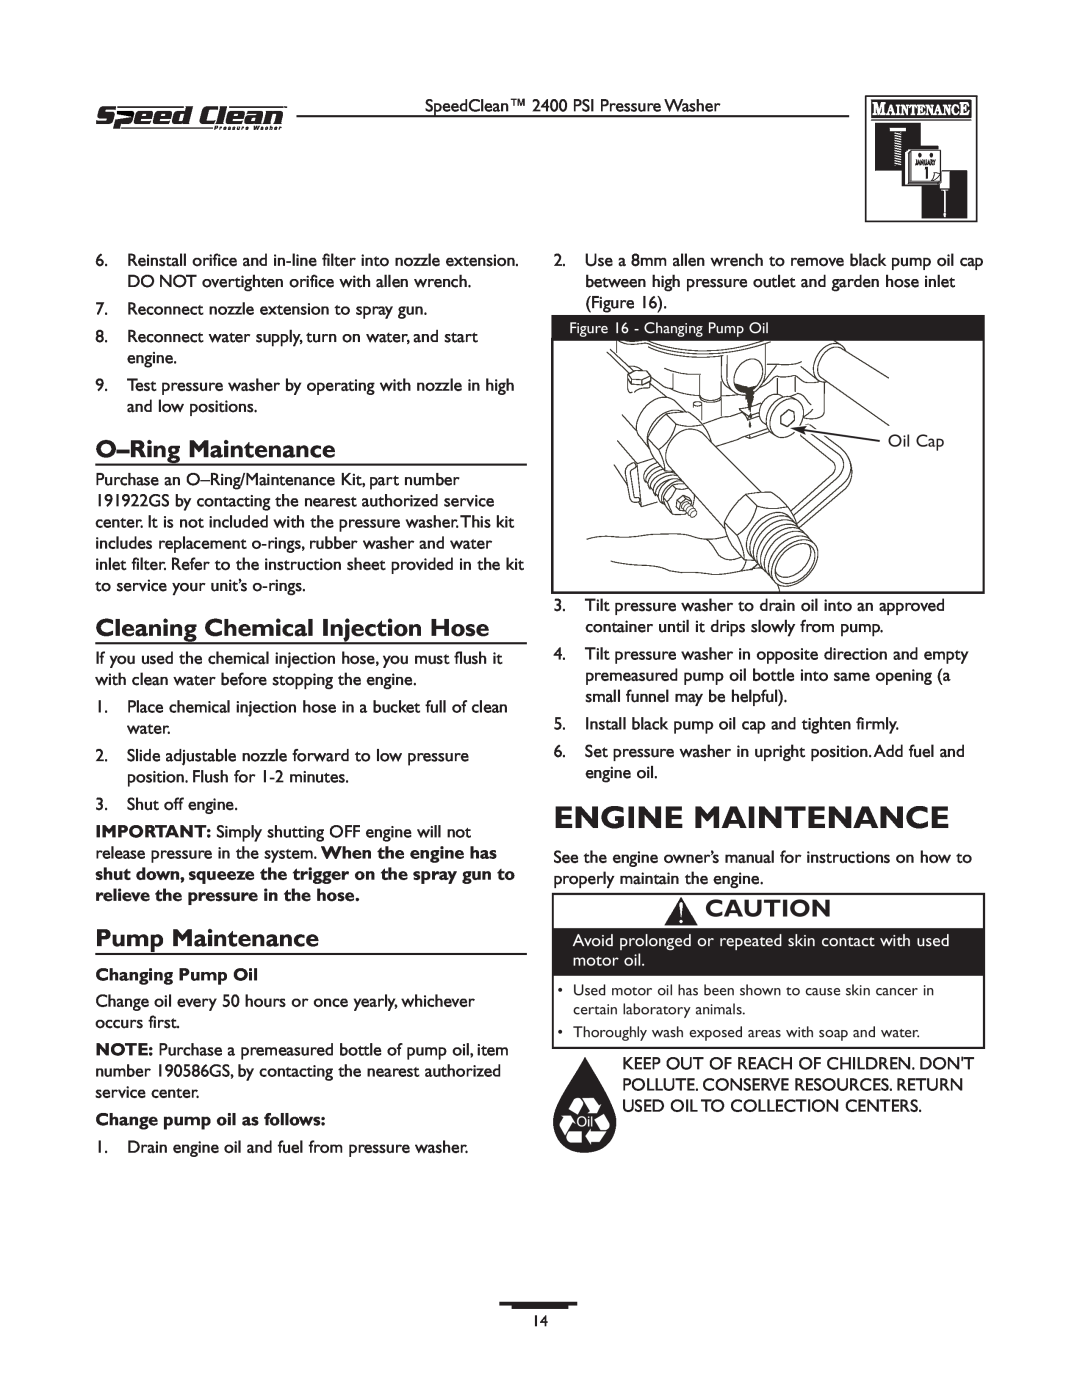 Briggs & Stratton 020227-0 Engine Maintenance, O-Ring Maintenance, Cleaning Chemical Injection Hose, Pump Maintenance 